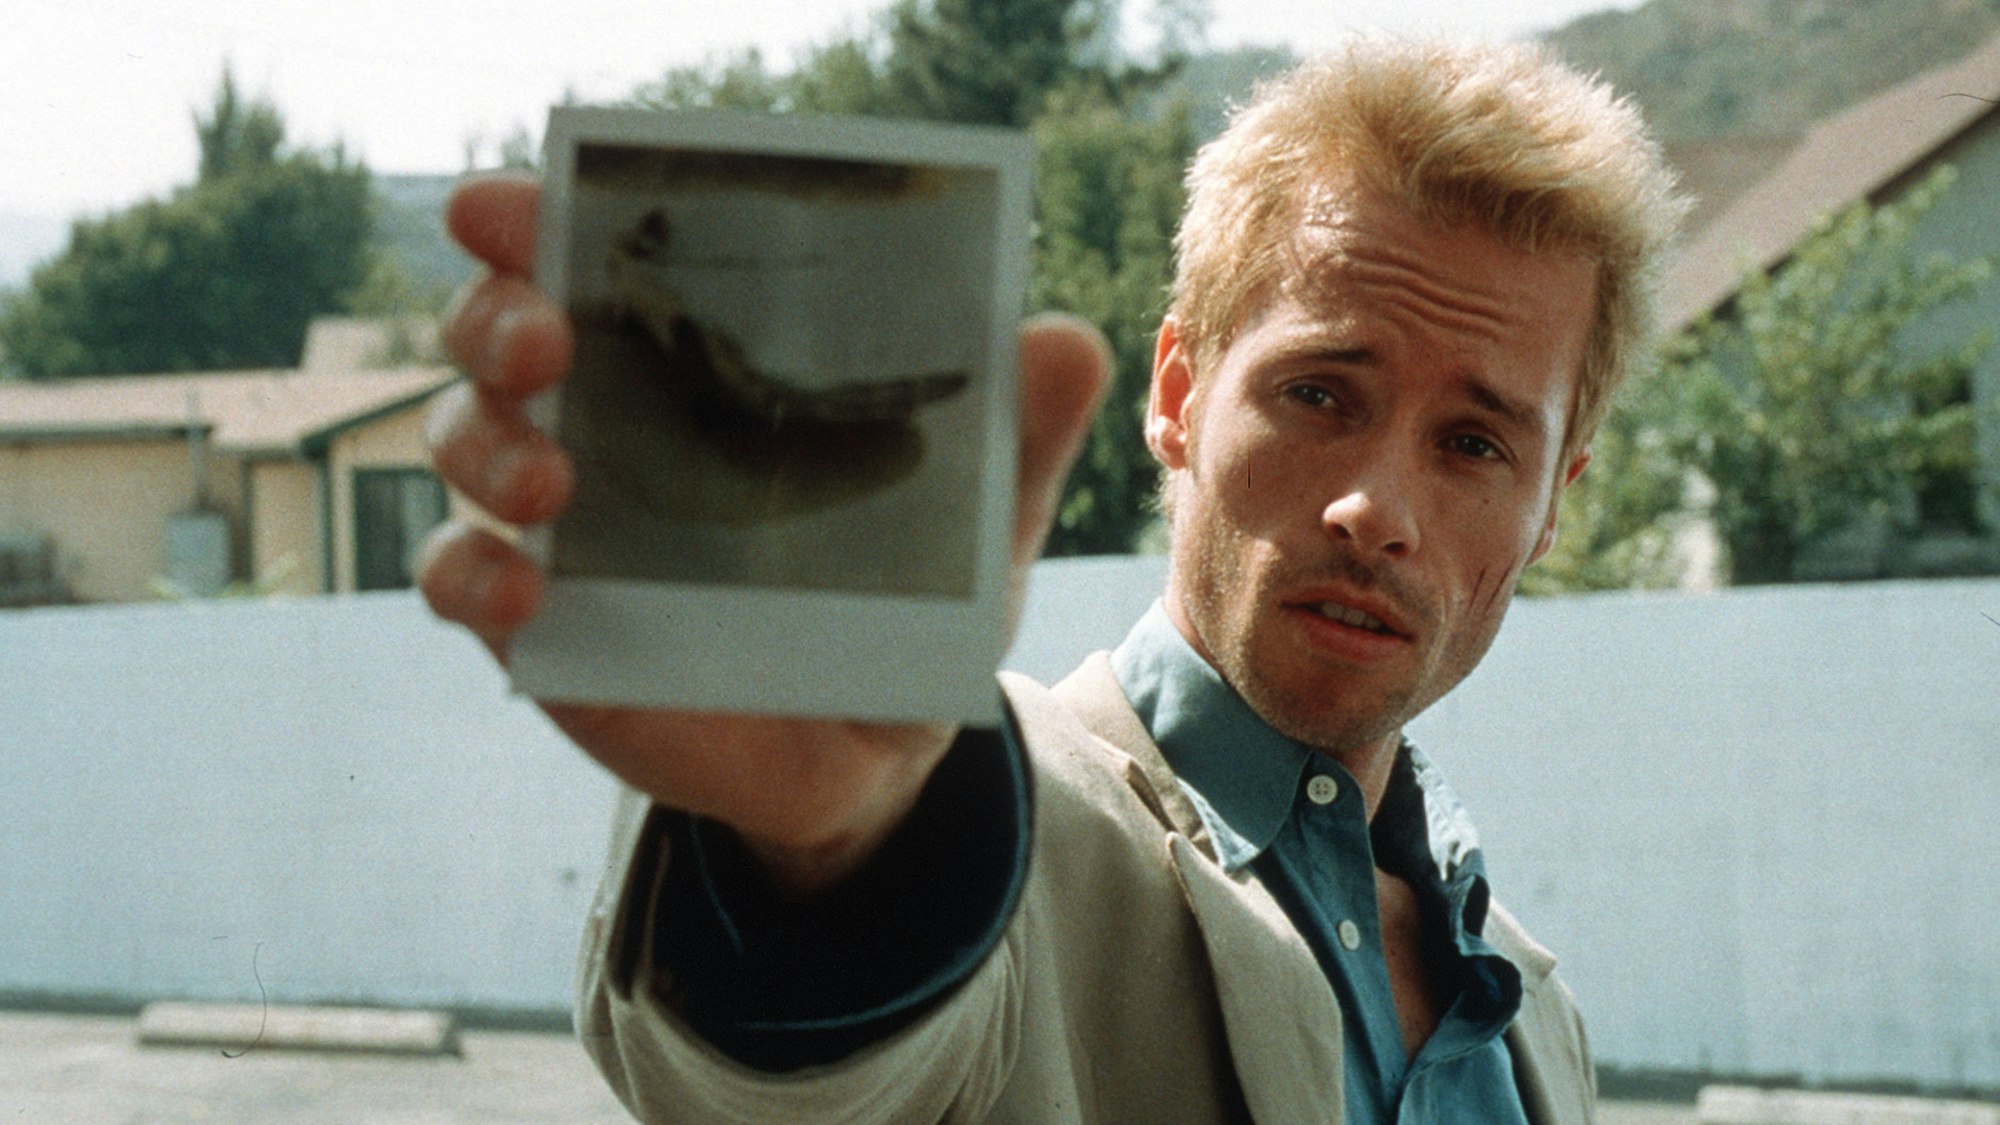 A man with bleached spiky hair and a gaunt face holds up a polaroid photo to the camera.